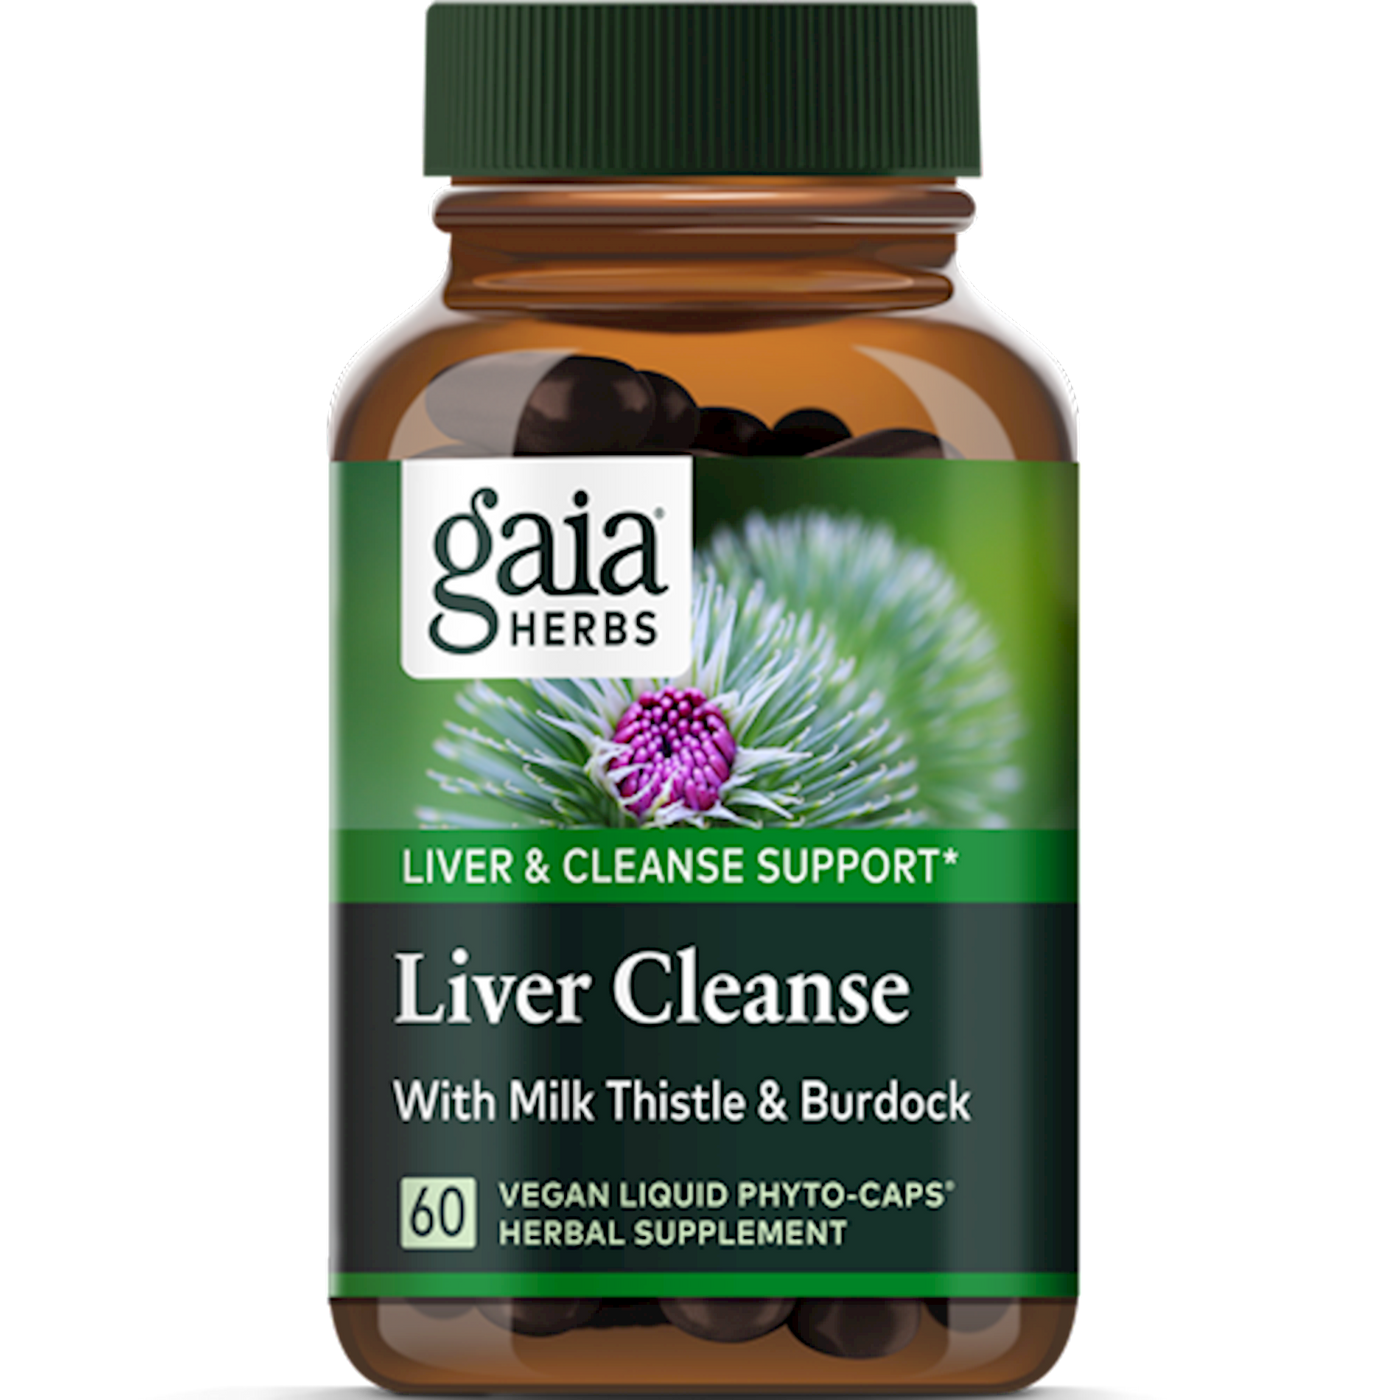 Liver Cleanse 60 vegcaps Curated Wellness